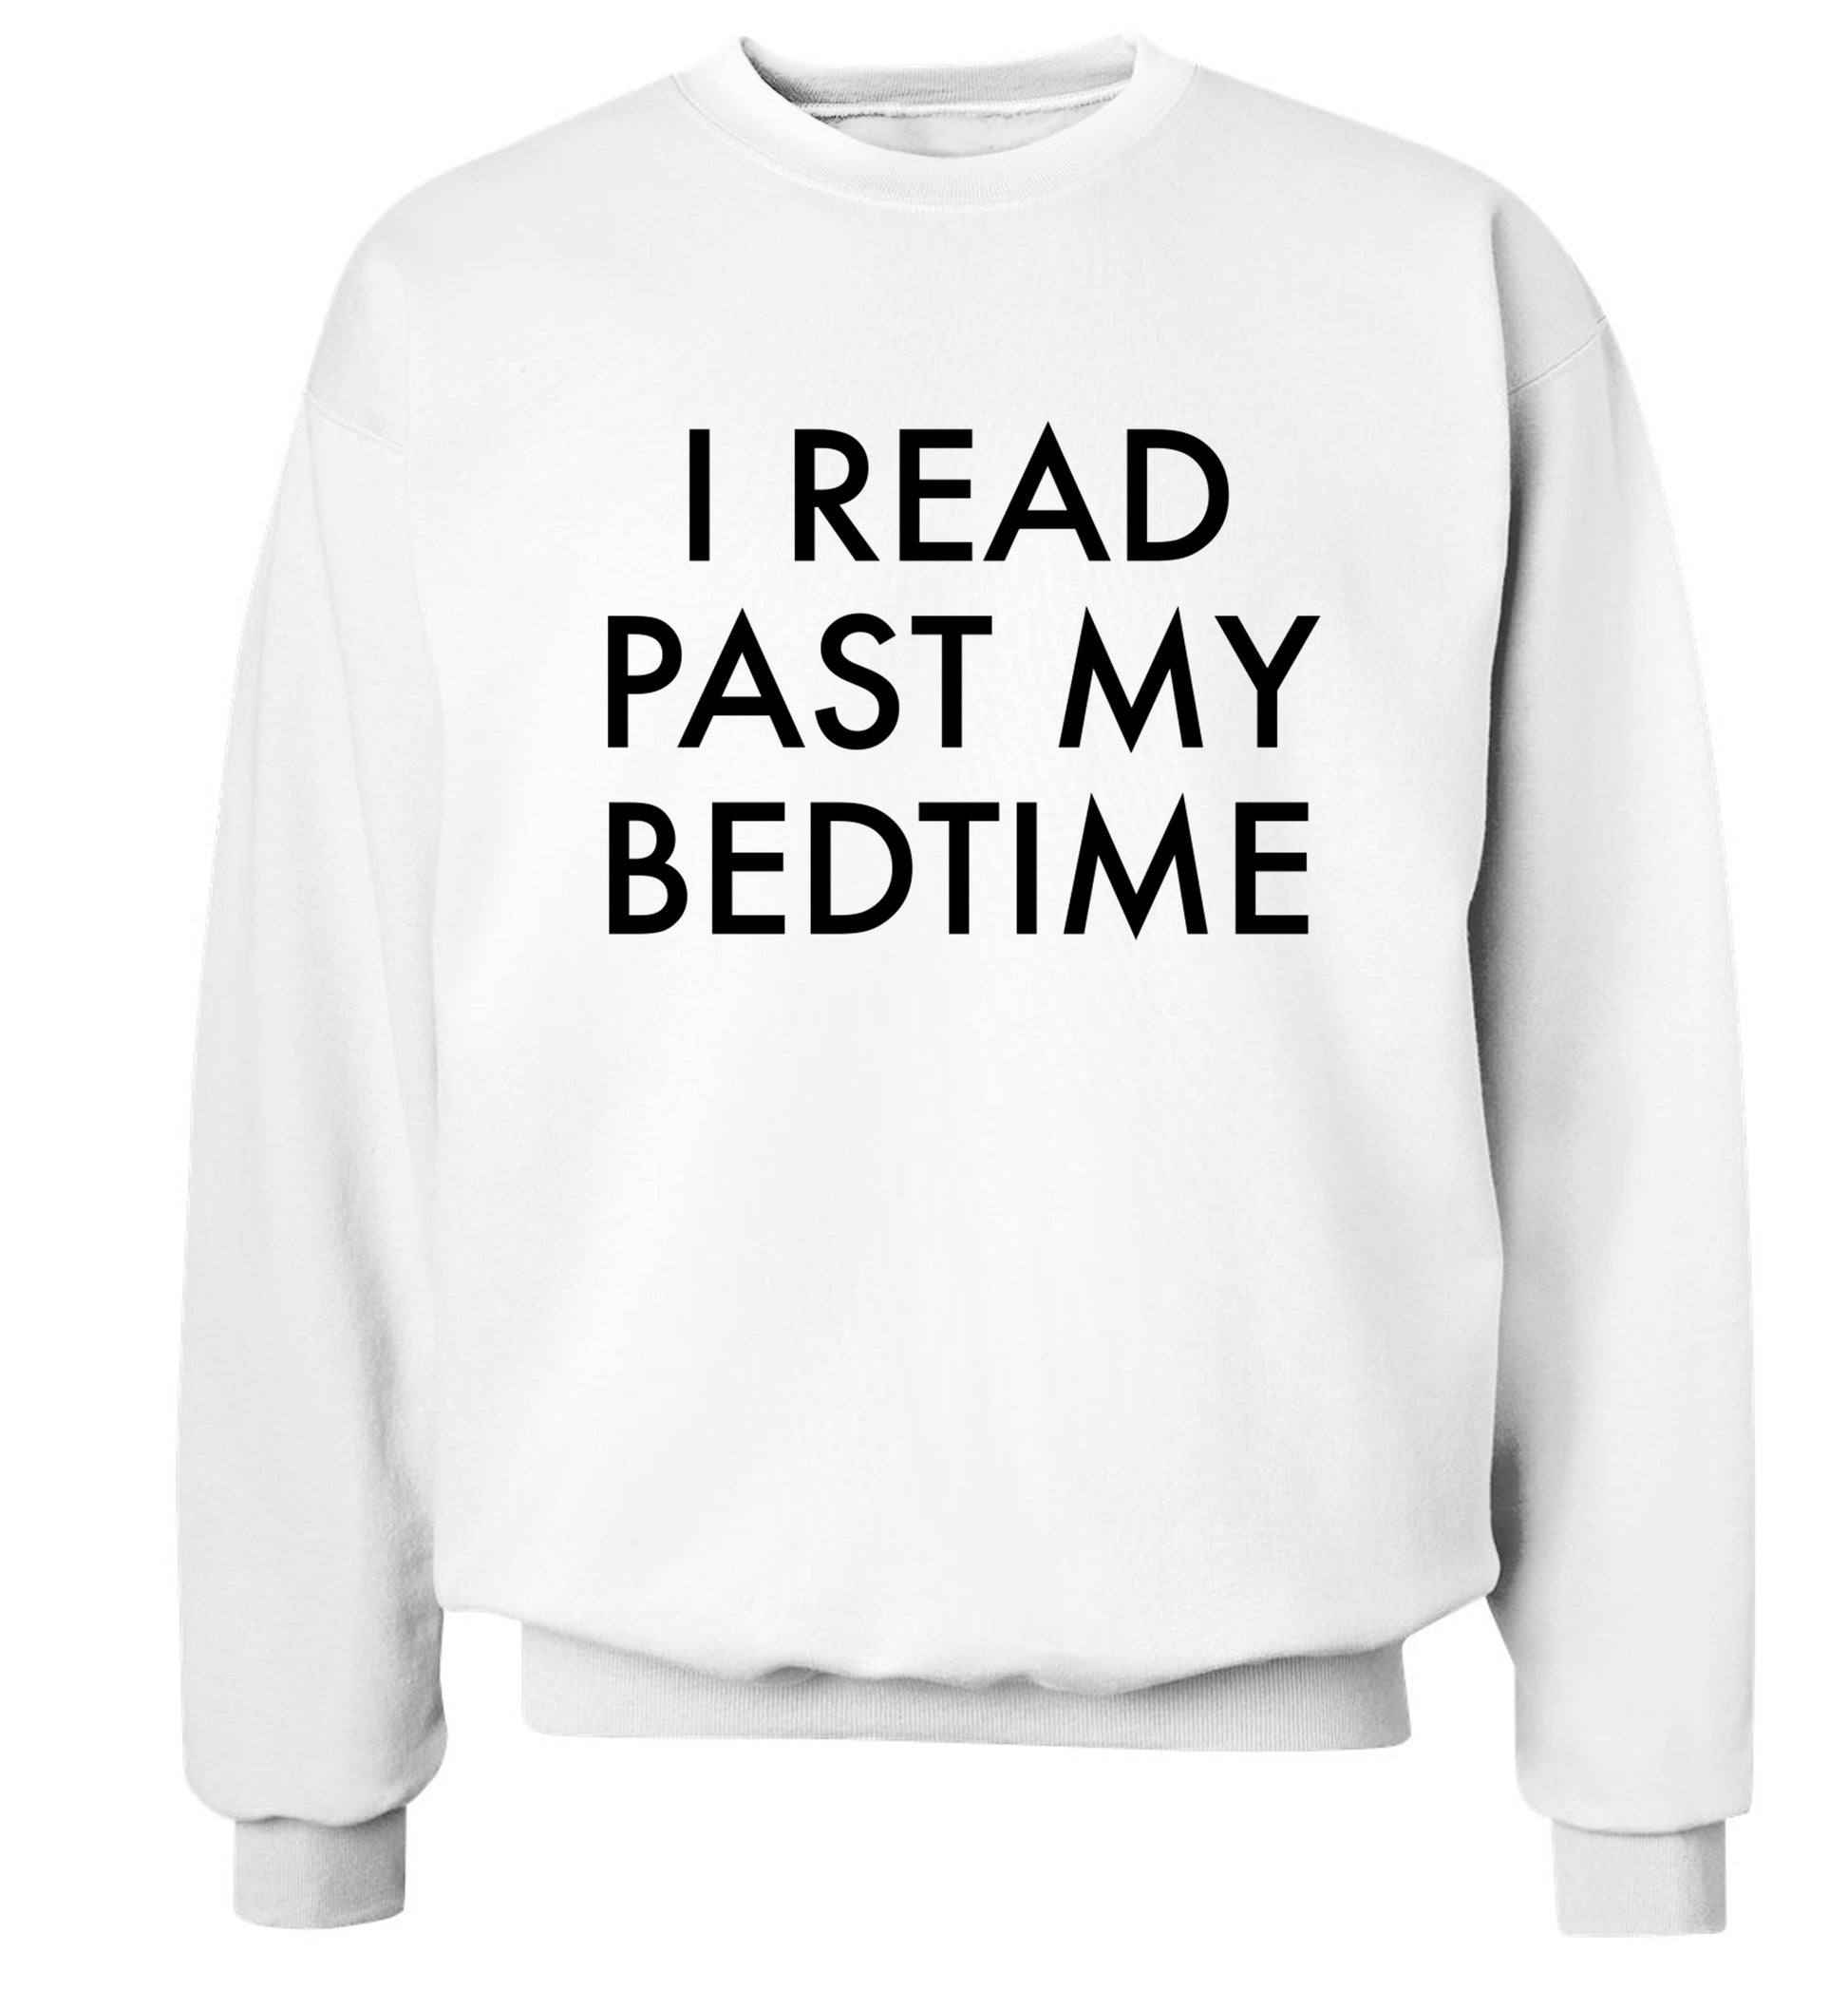 I read past my bedtime Adult's unisex white Sweater 2XL